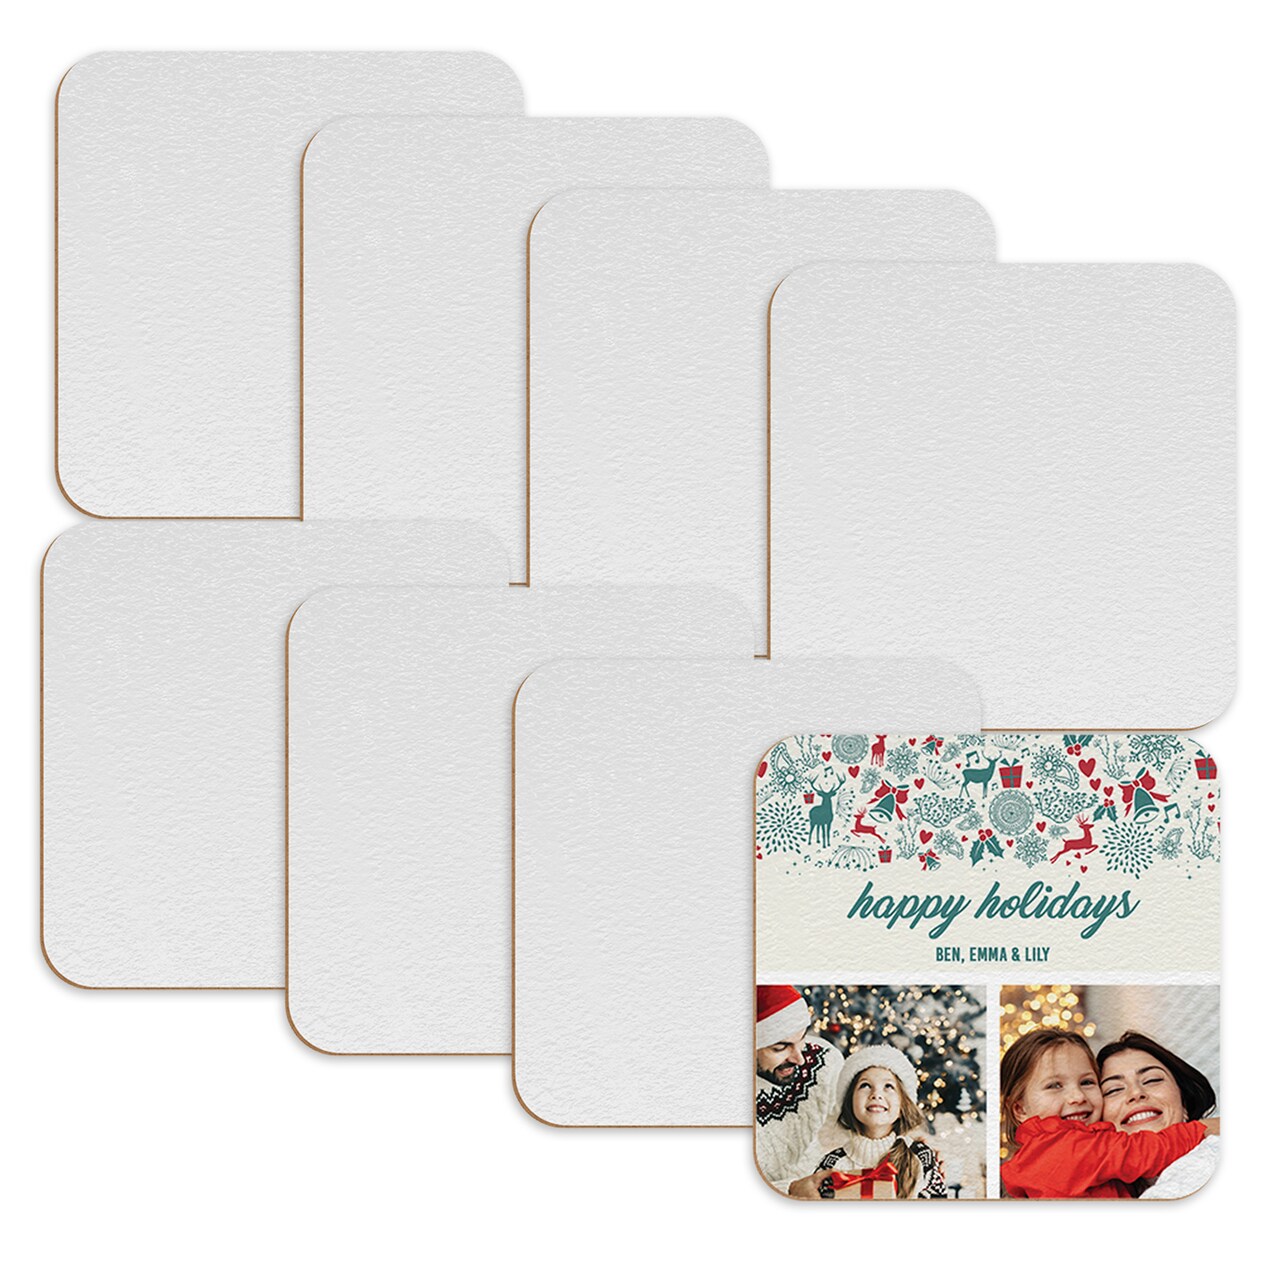 Unisub Sublimation Blank Coaster, Hardboard Textured Square, Coasters for  Sublimation Imprinting Products for, 3.5 x 3.55 x .125